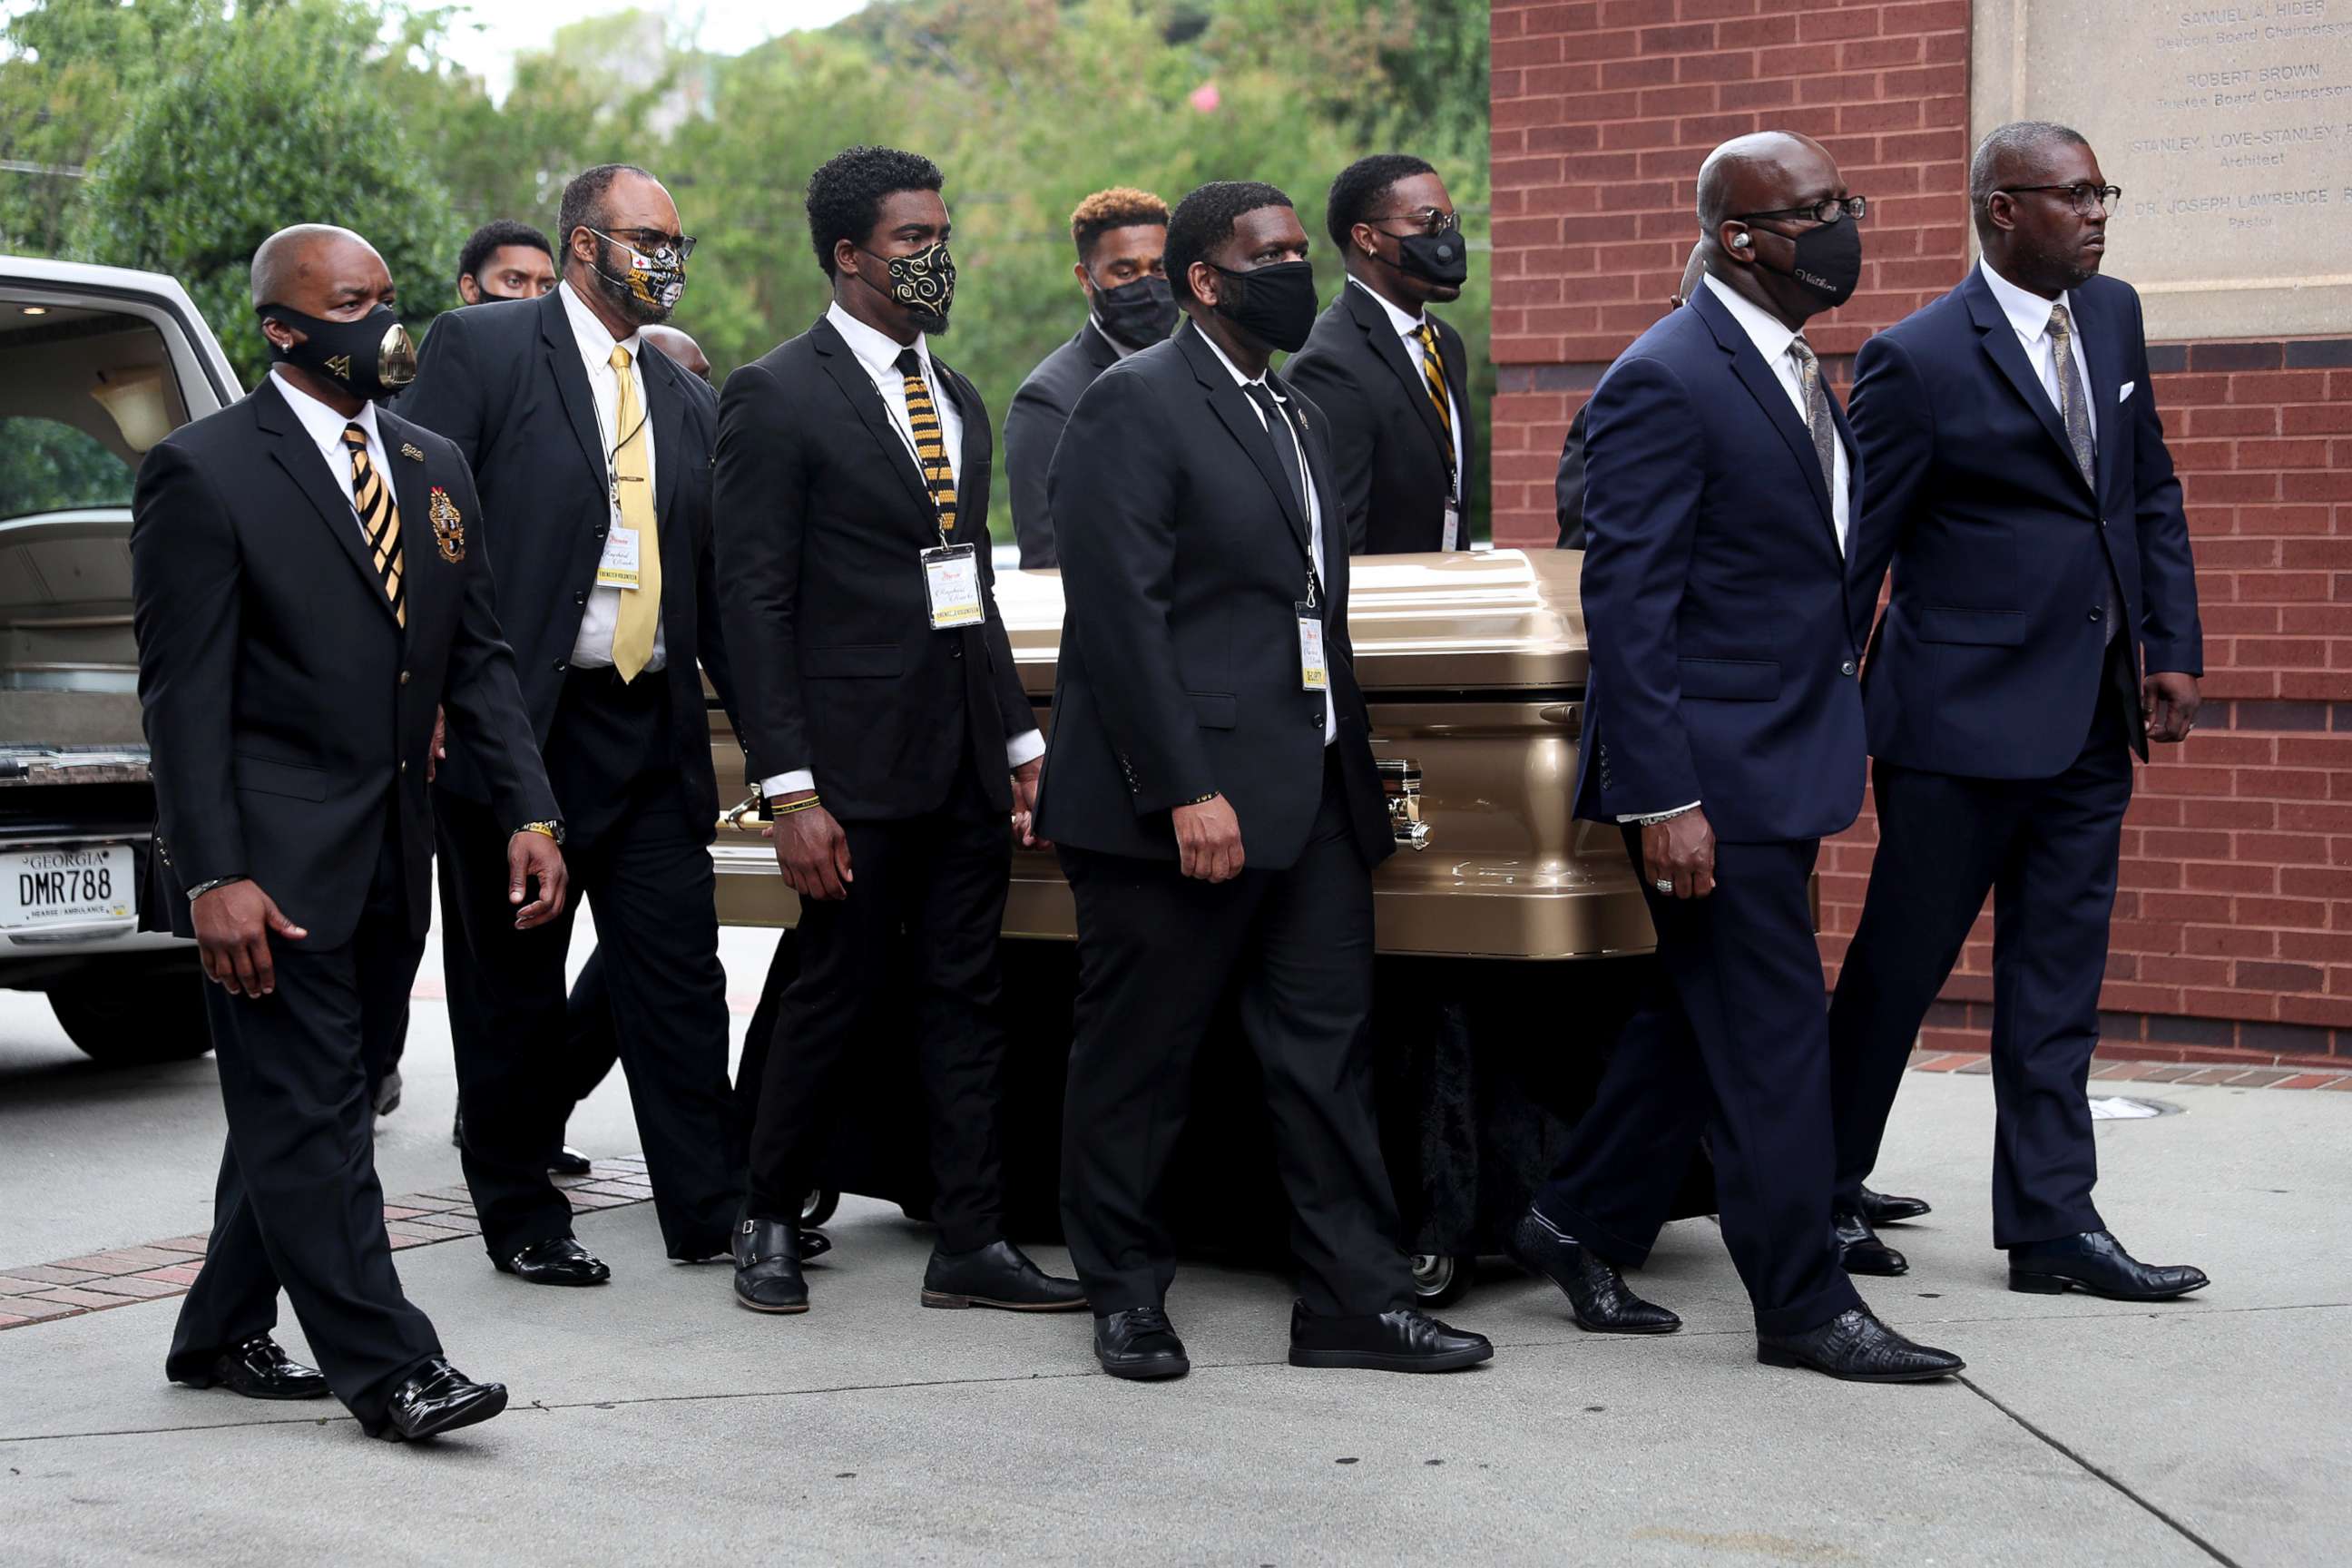 PHOTO: Pallbearers bring the remains of Rayshard Brooks to the Ebenezer Baptist Church for his funeral, June 23, 2020 in Atlanta.